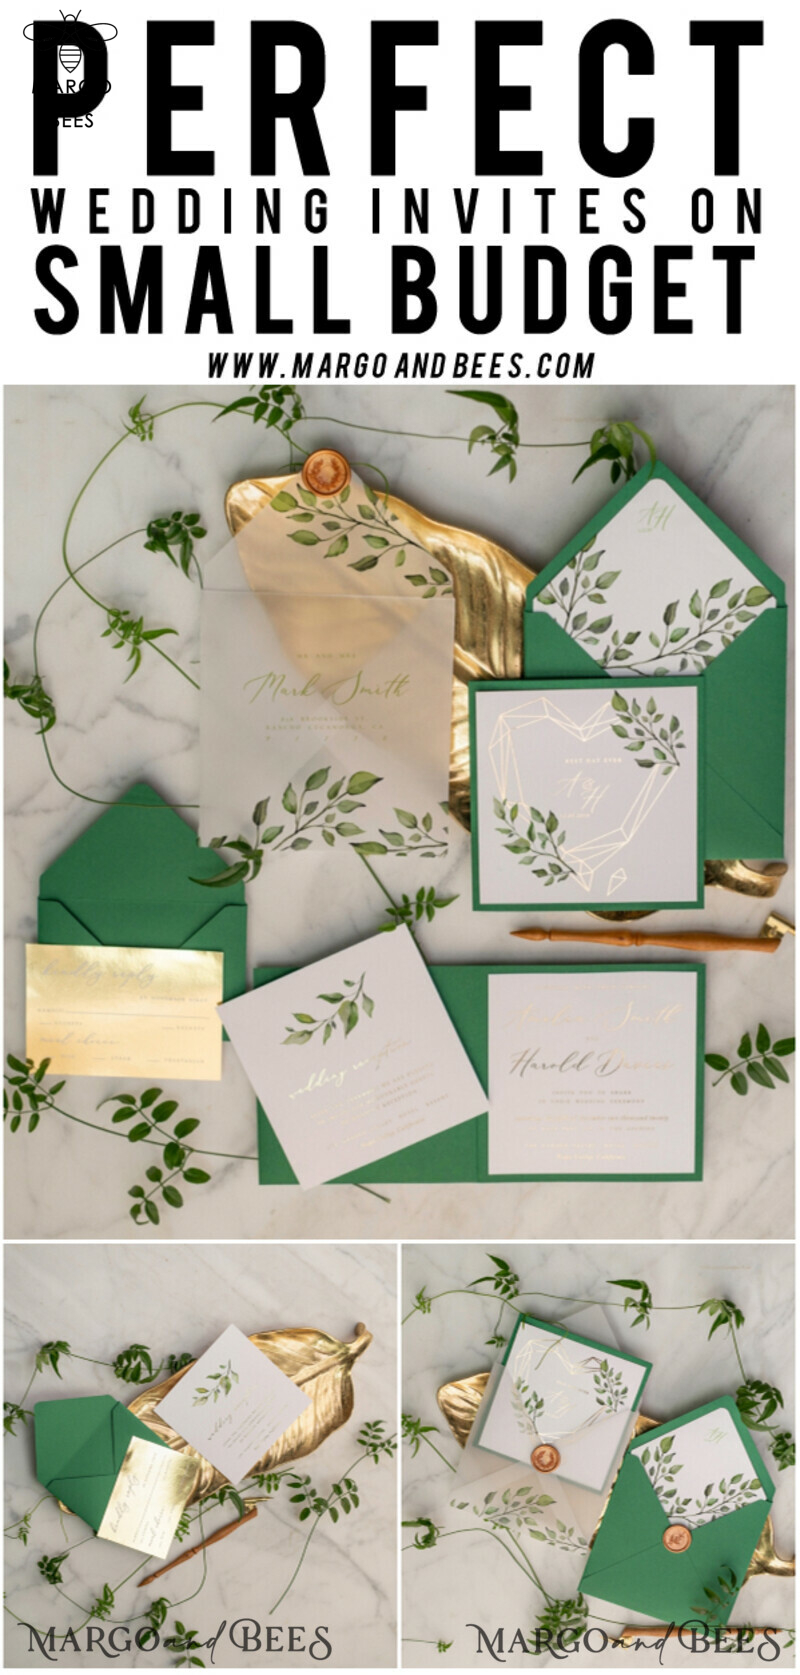 Luxury Gold Foil Wedding Invitations, Glamour Greenery Gold Wedding Invites, Elegant Pocketfold Wedding Cards, Geometric Vellum Wedding Invitation Suite-8